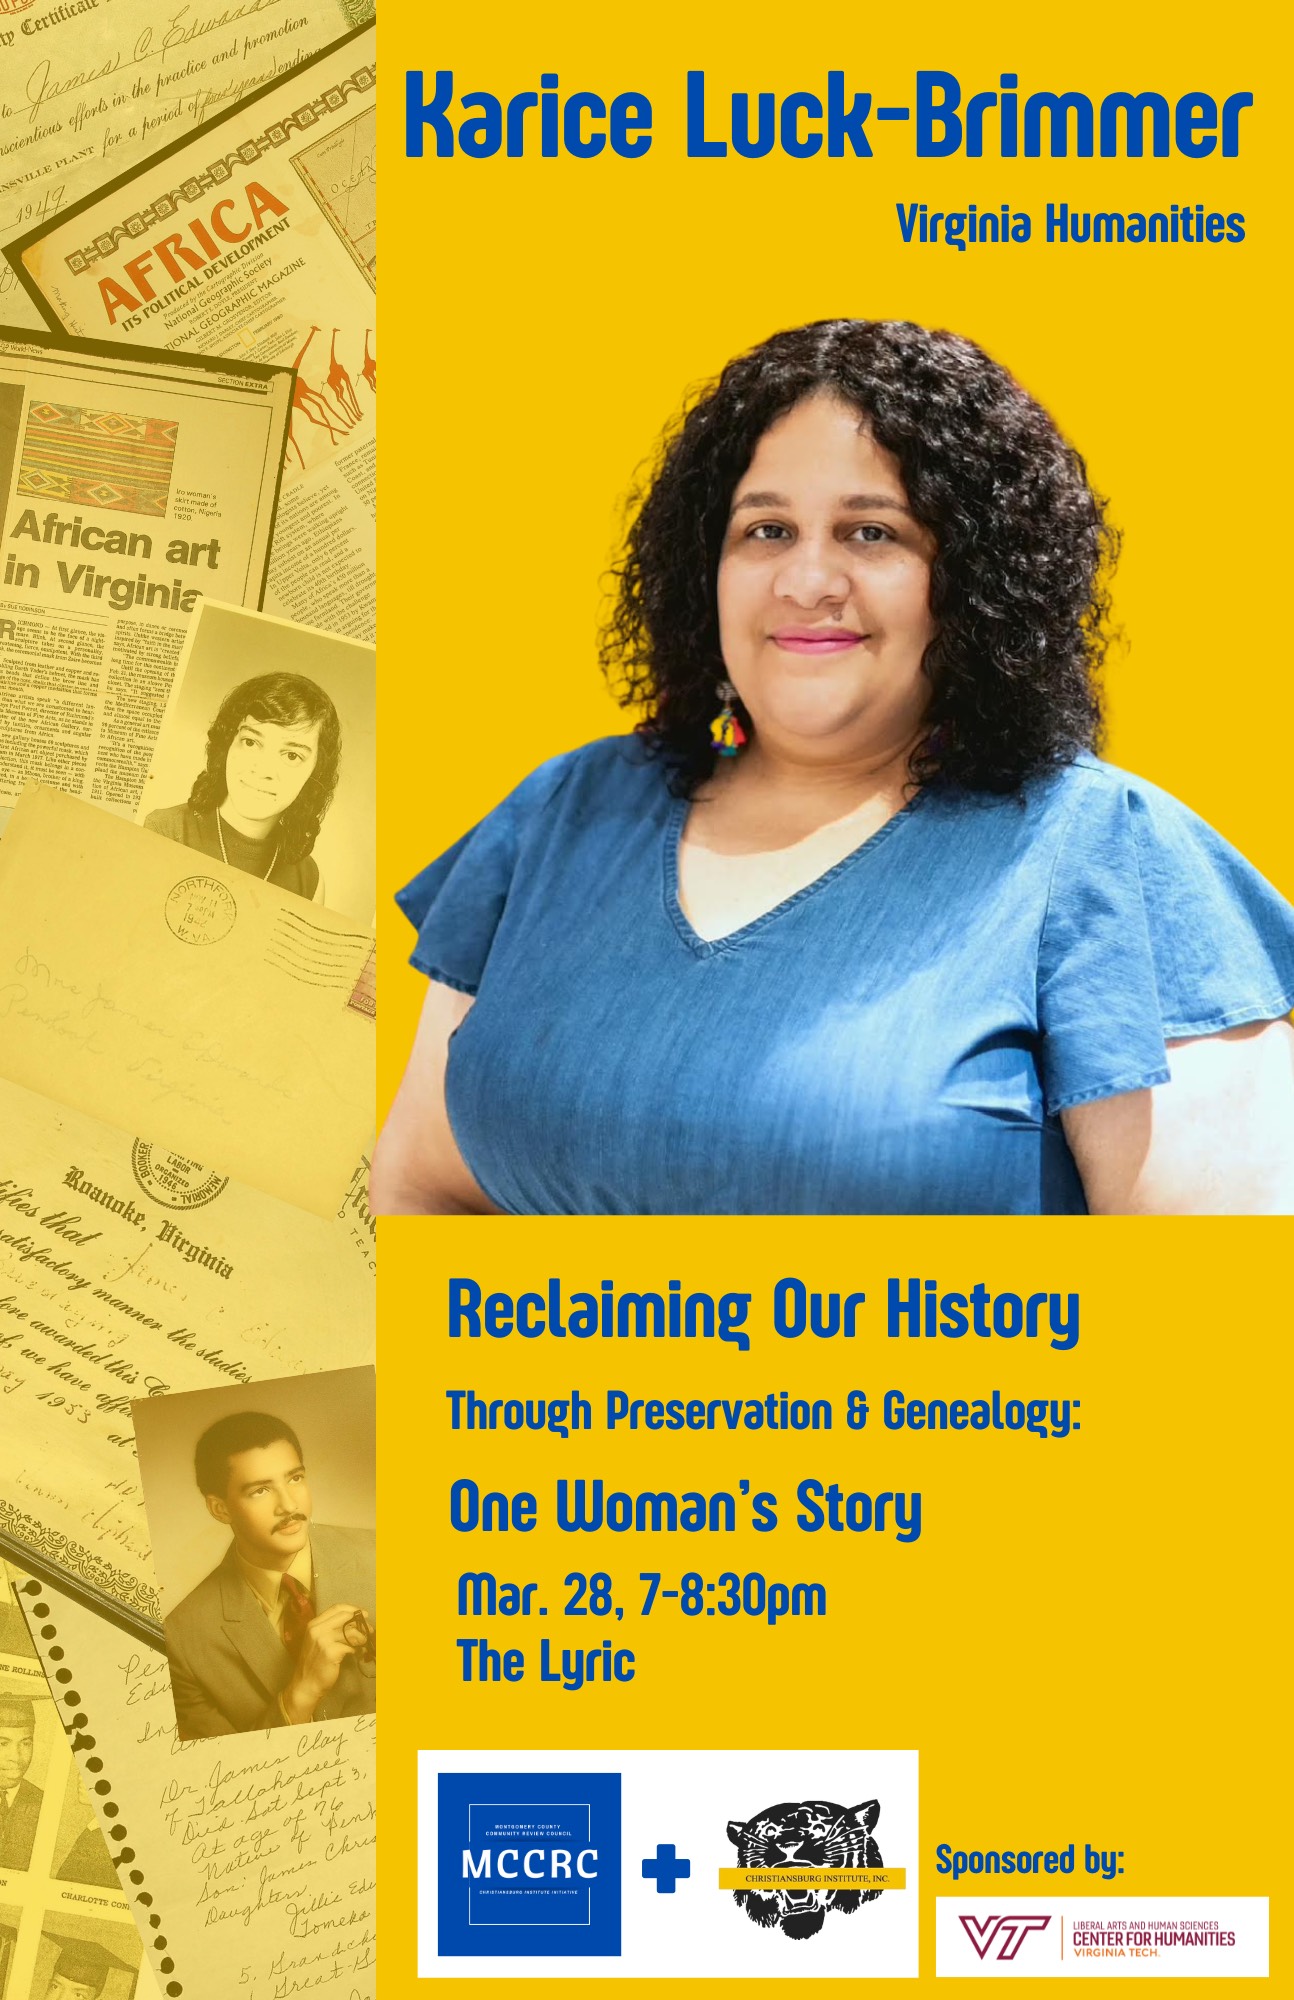 Reclaiming Our History Through Preservation & Genealogy: One Woman’s Story (Lecture)